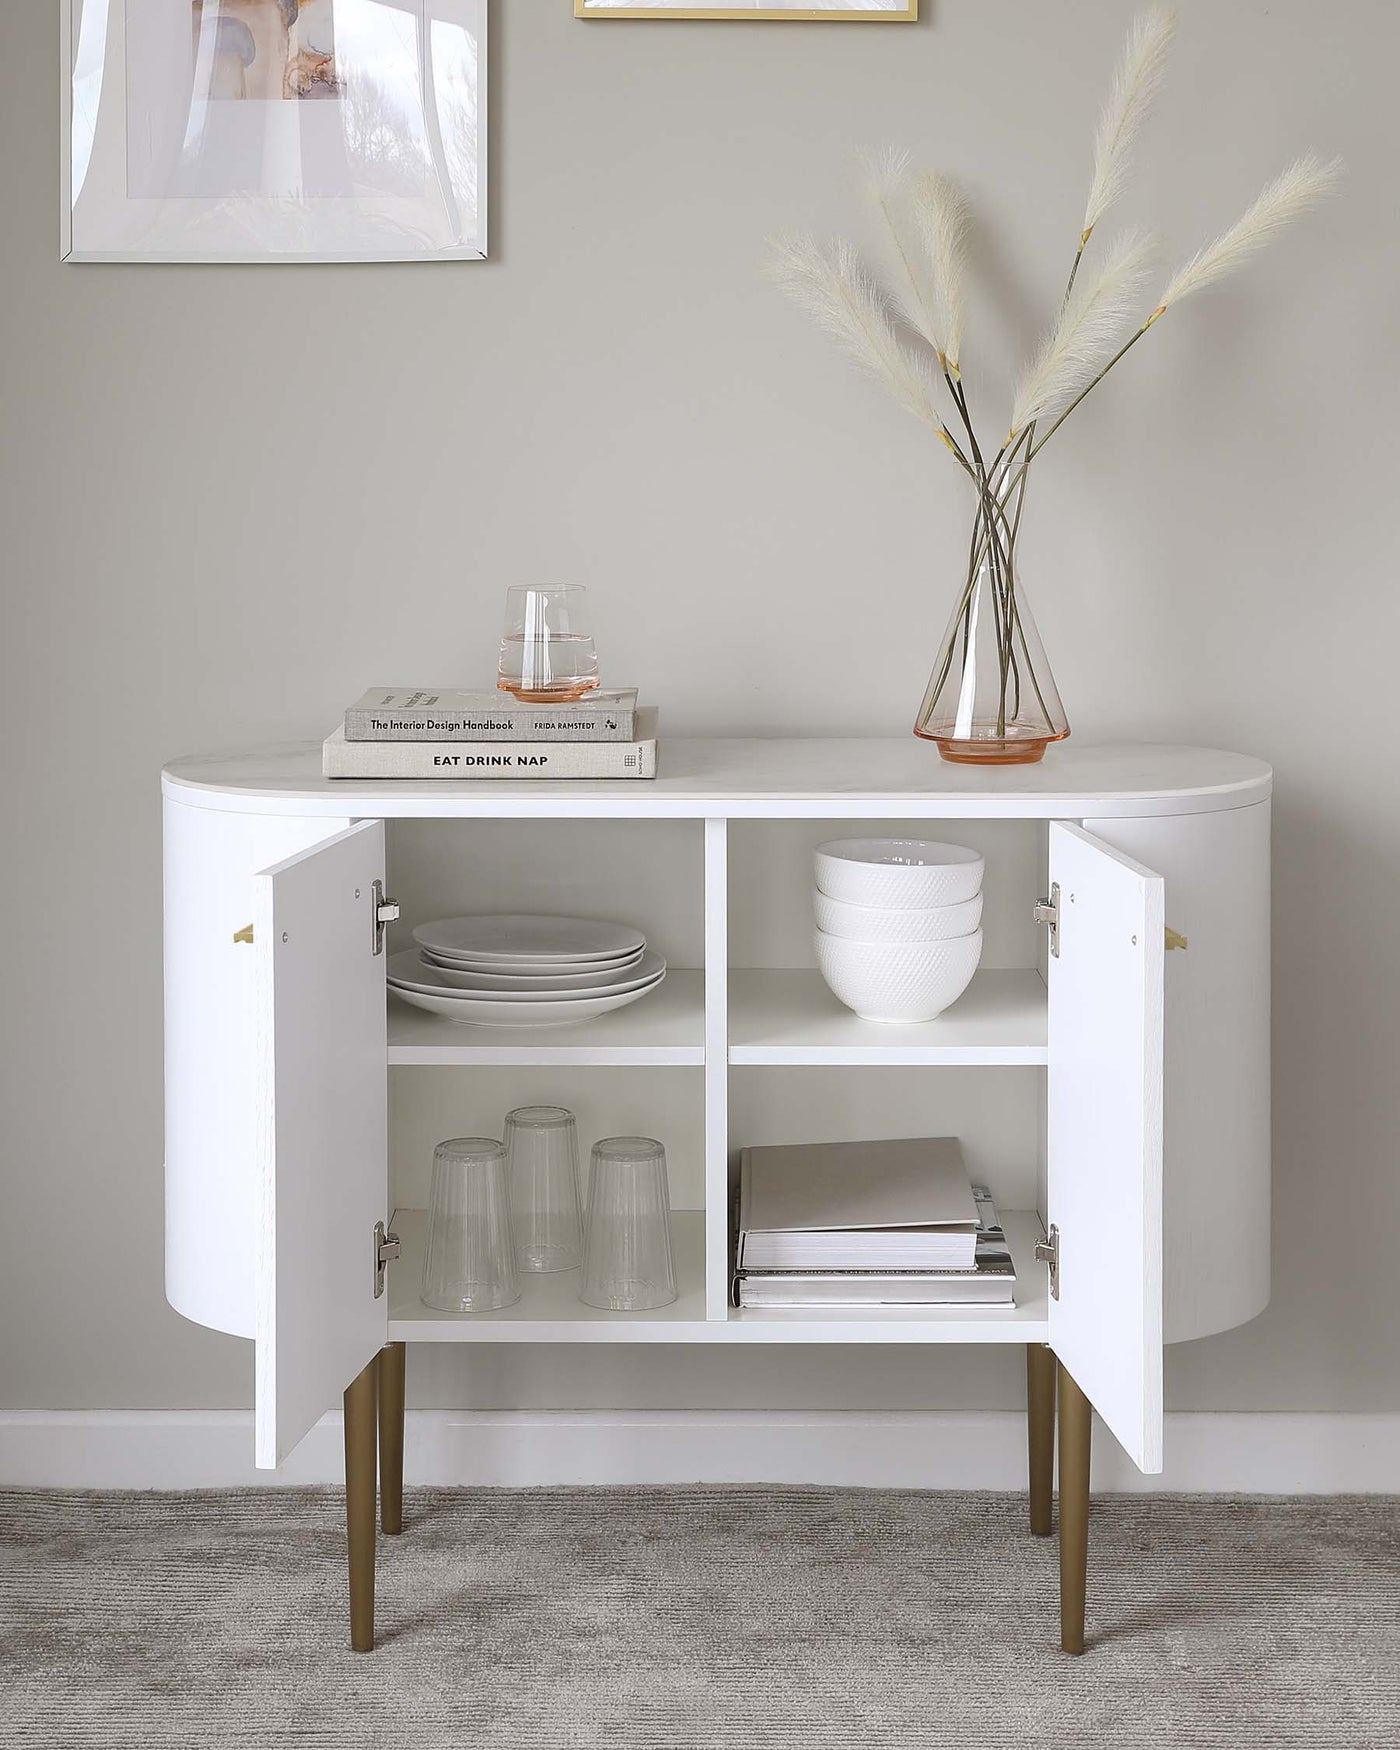 Elegant modern white sideboard with curved edges and half-circle cabinet doors, standing on splayed wooden legs. The sideboard is styled with neatly stacked books, glassware, and white ceramic dishes, complemented by a decorative glass vase with tall feather reeds.